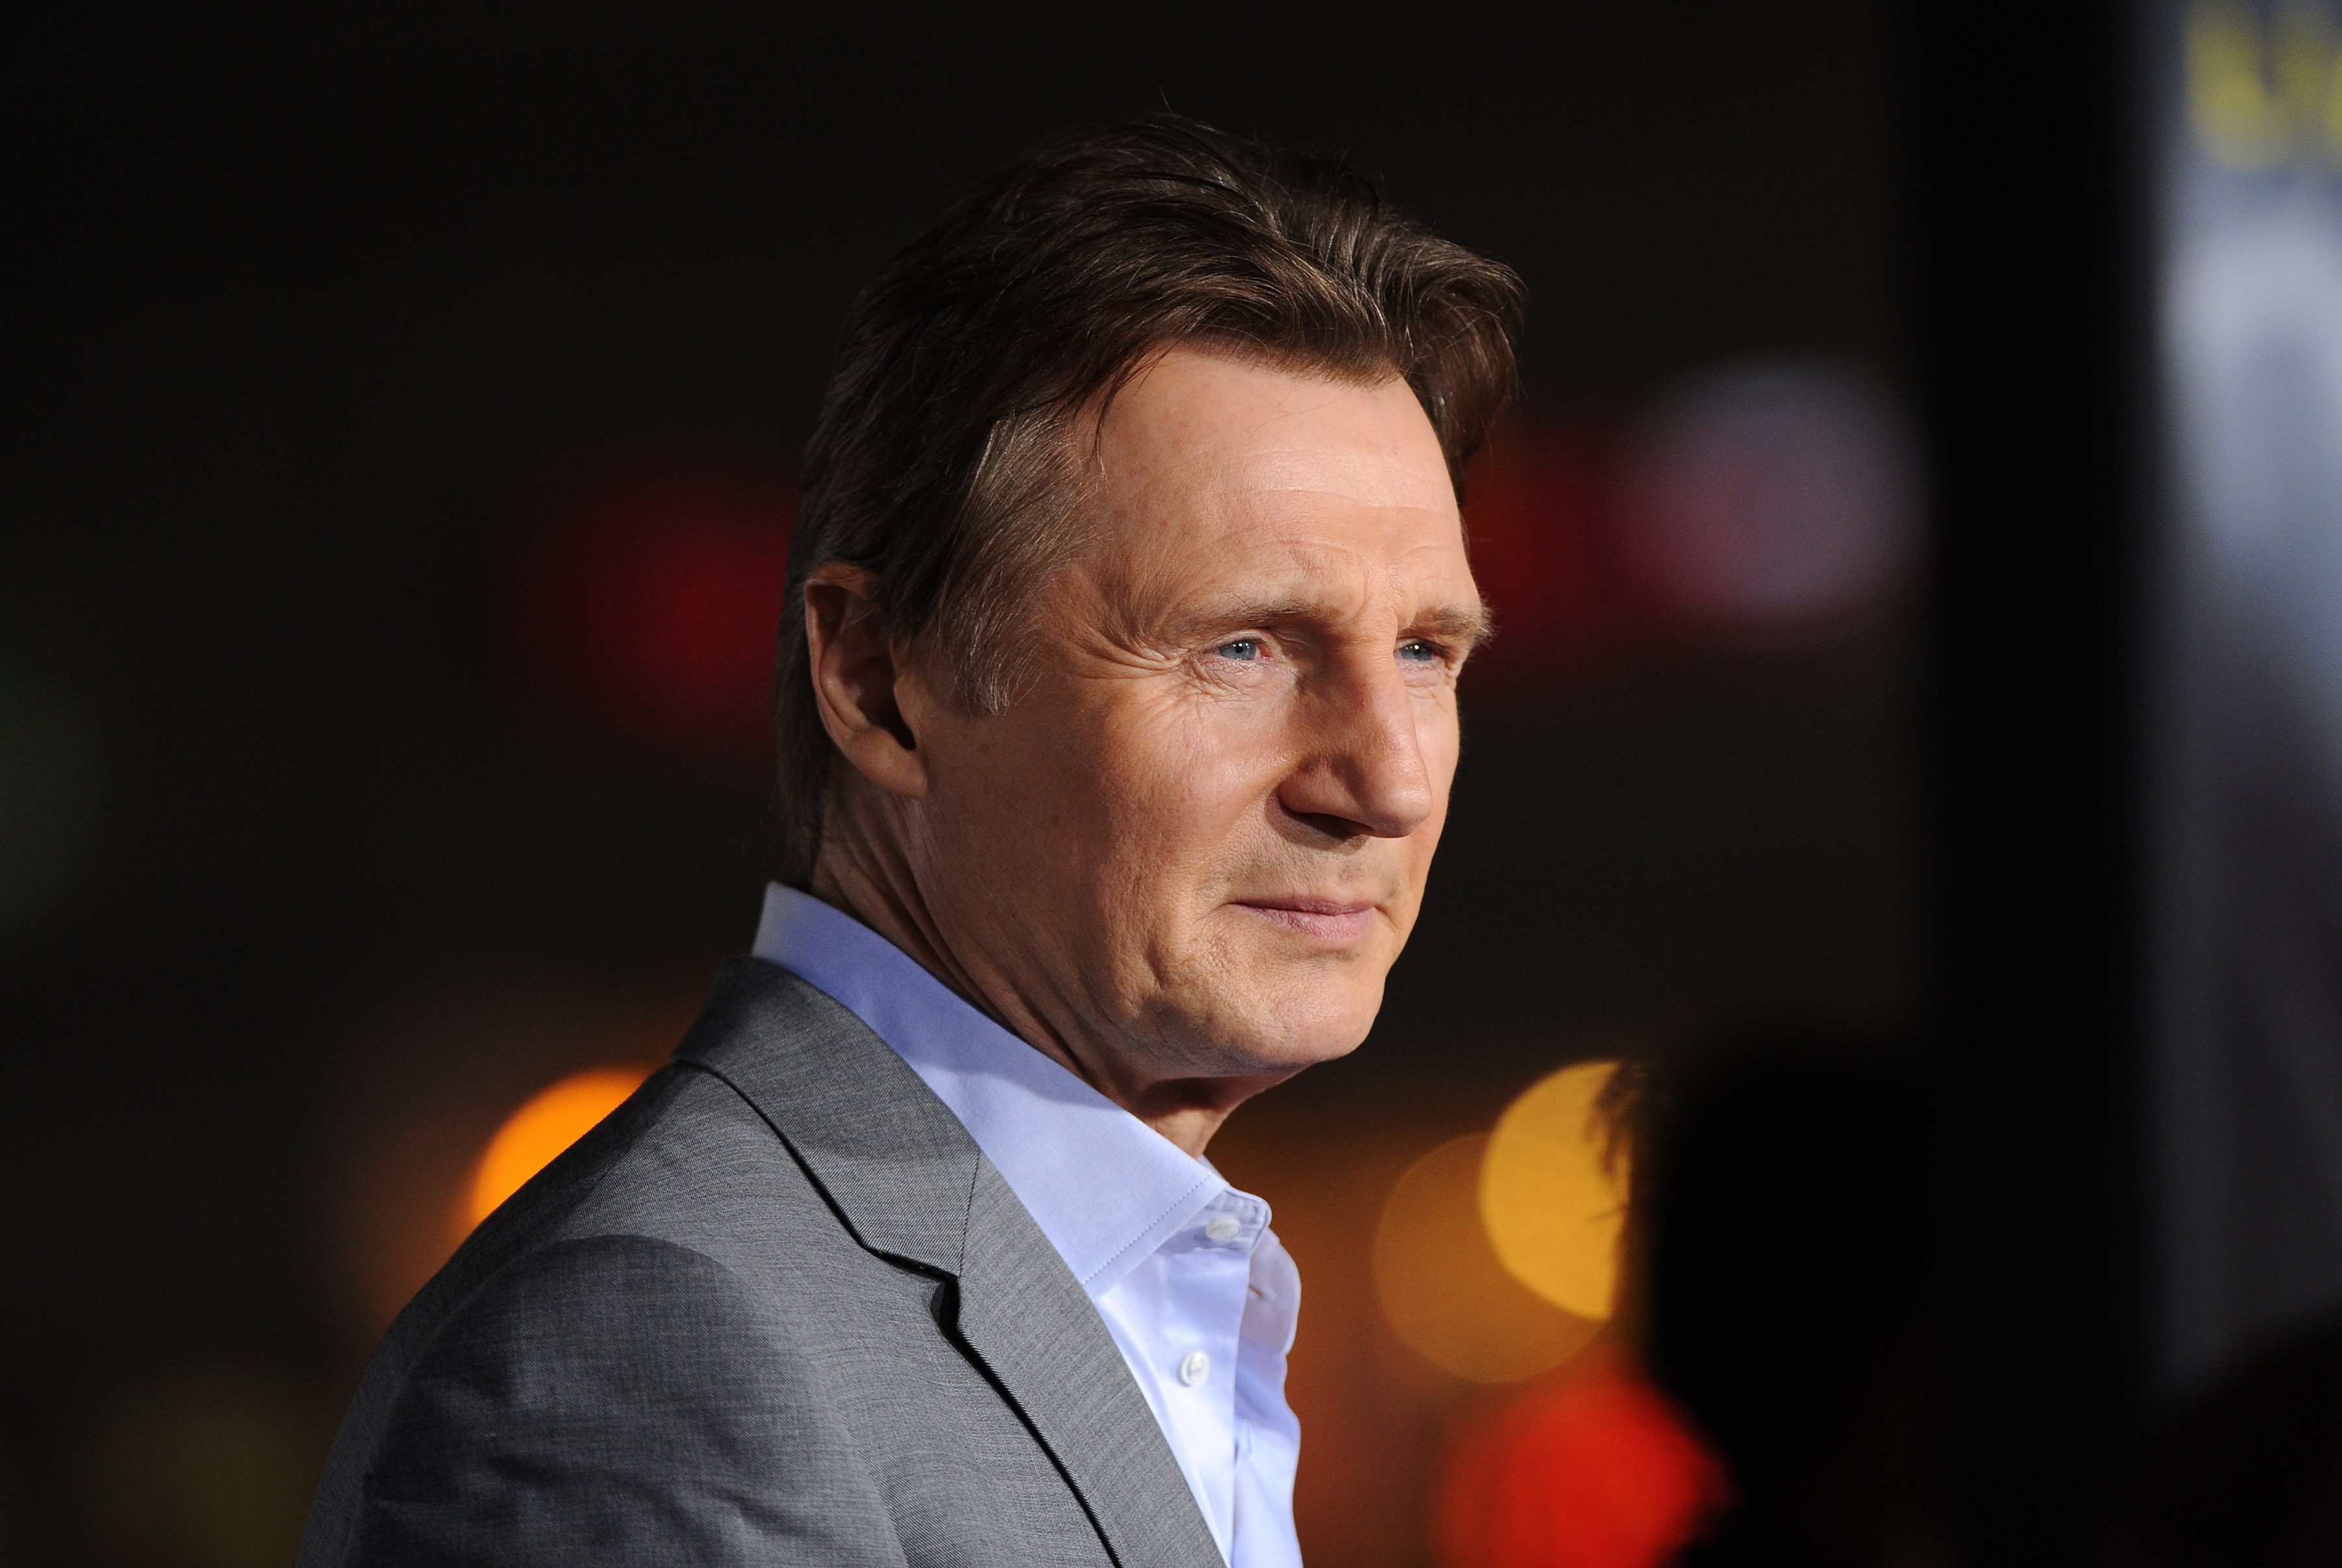 Liam Neeson at the Los Angeles premiere of "Non-Stop"